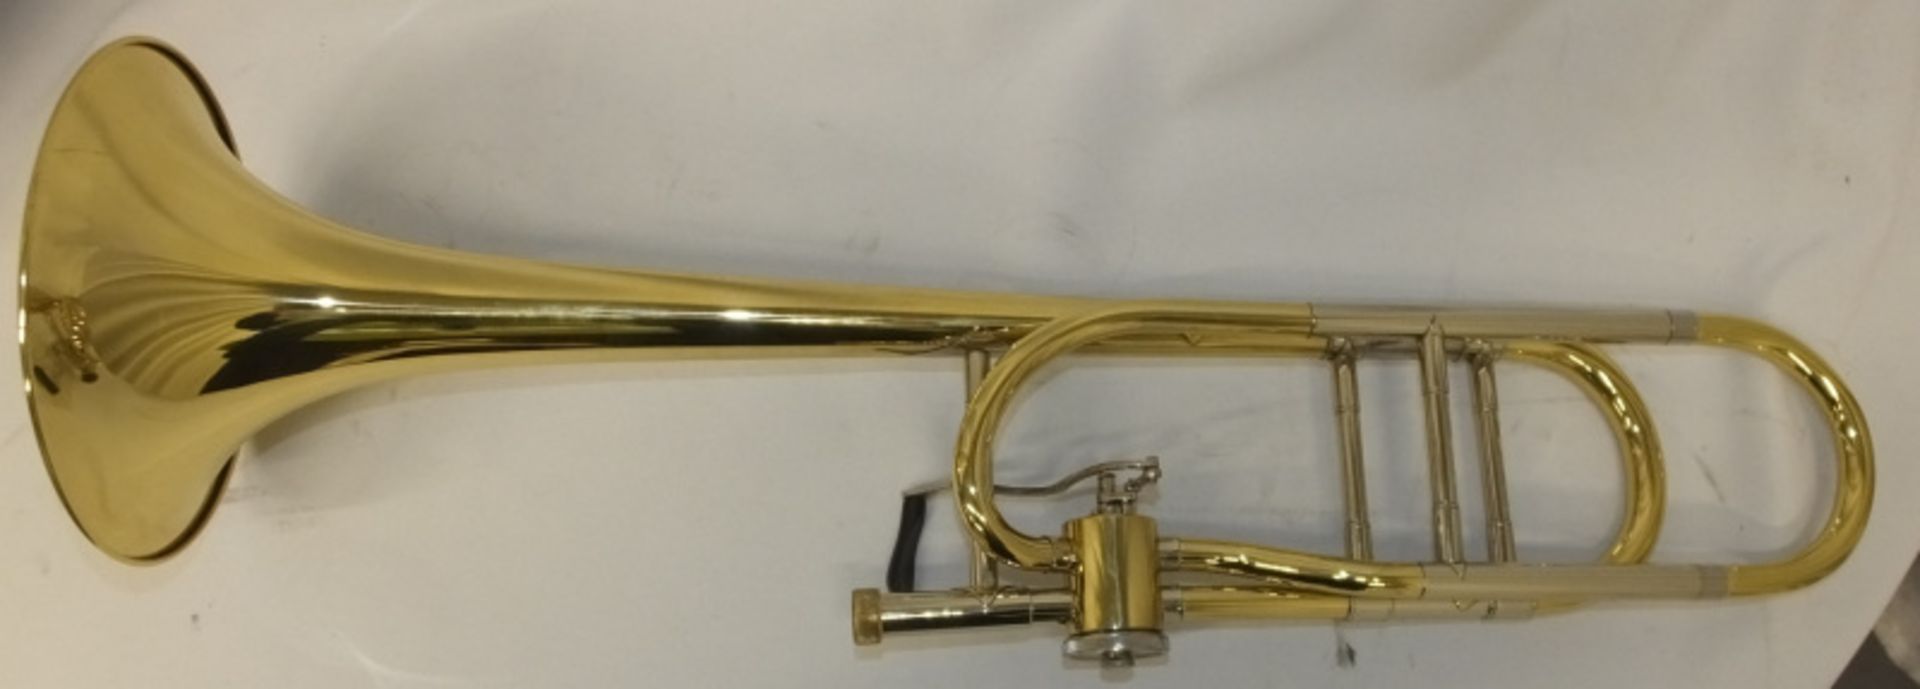 Gear 4 Music Trombone in case - Please check photos carefully - Image 3 of 11